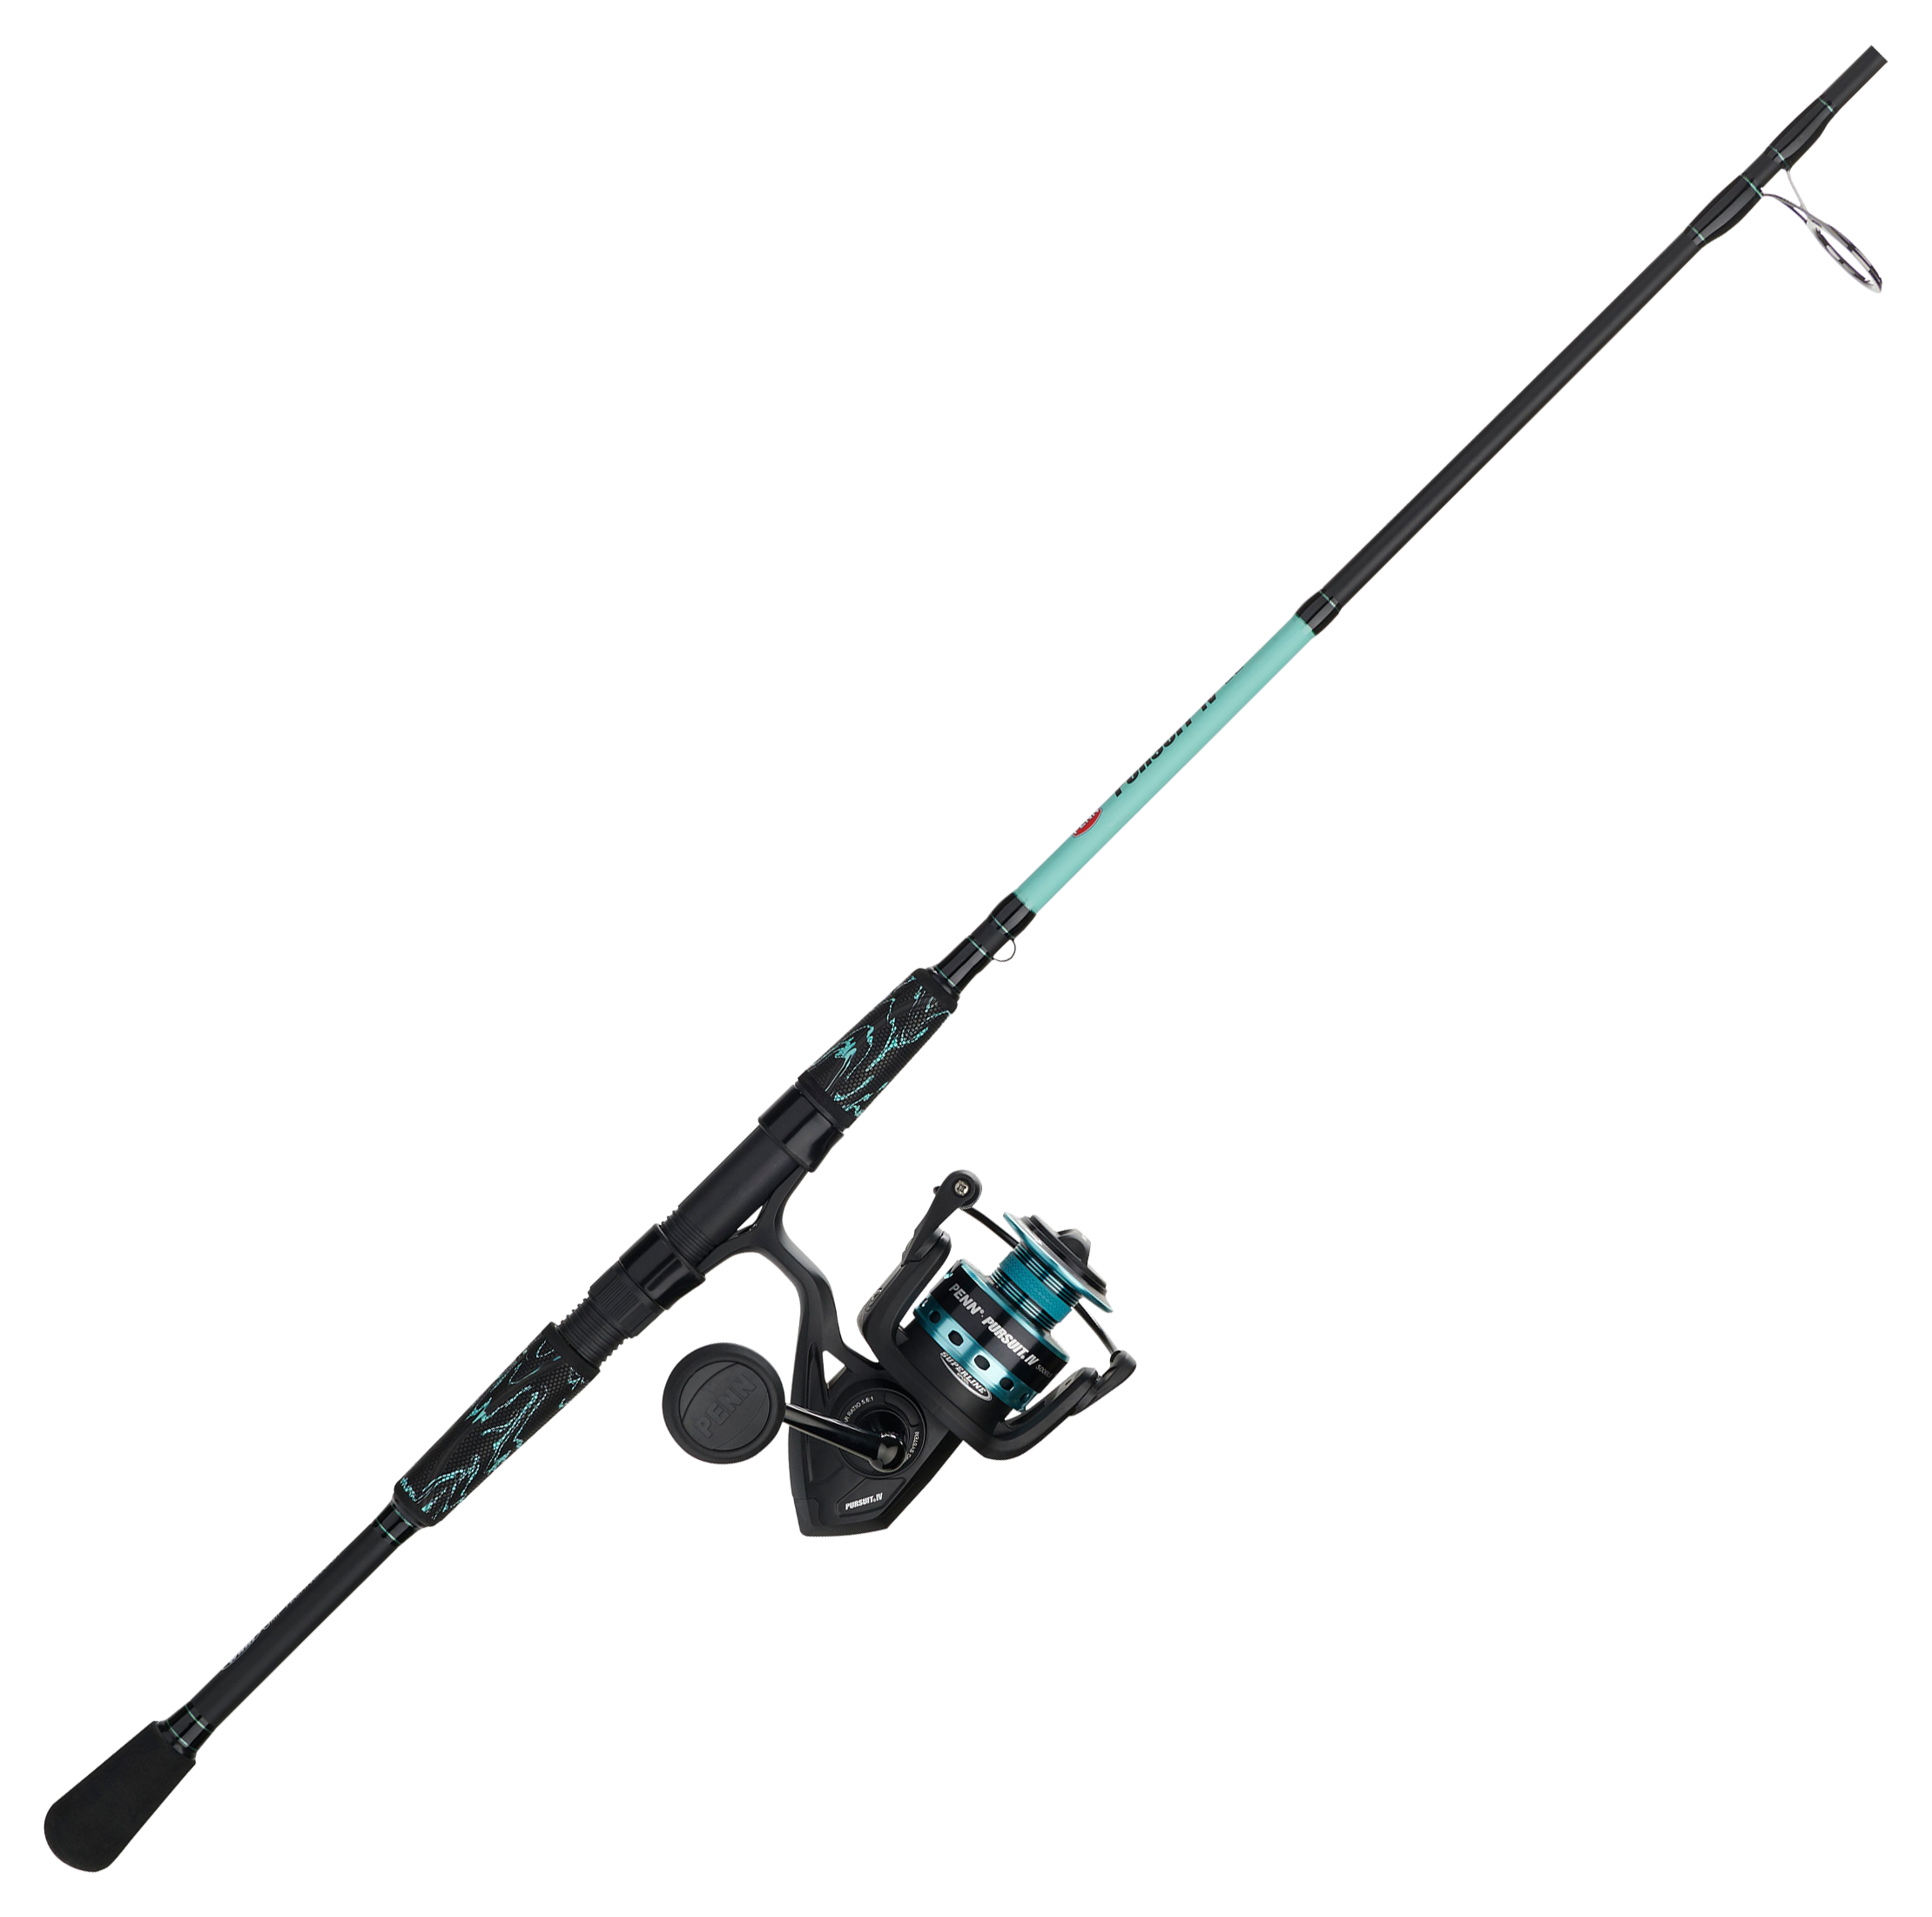 PENN Pursuit IV LE Spinning Combo